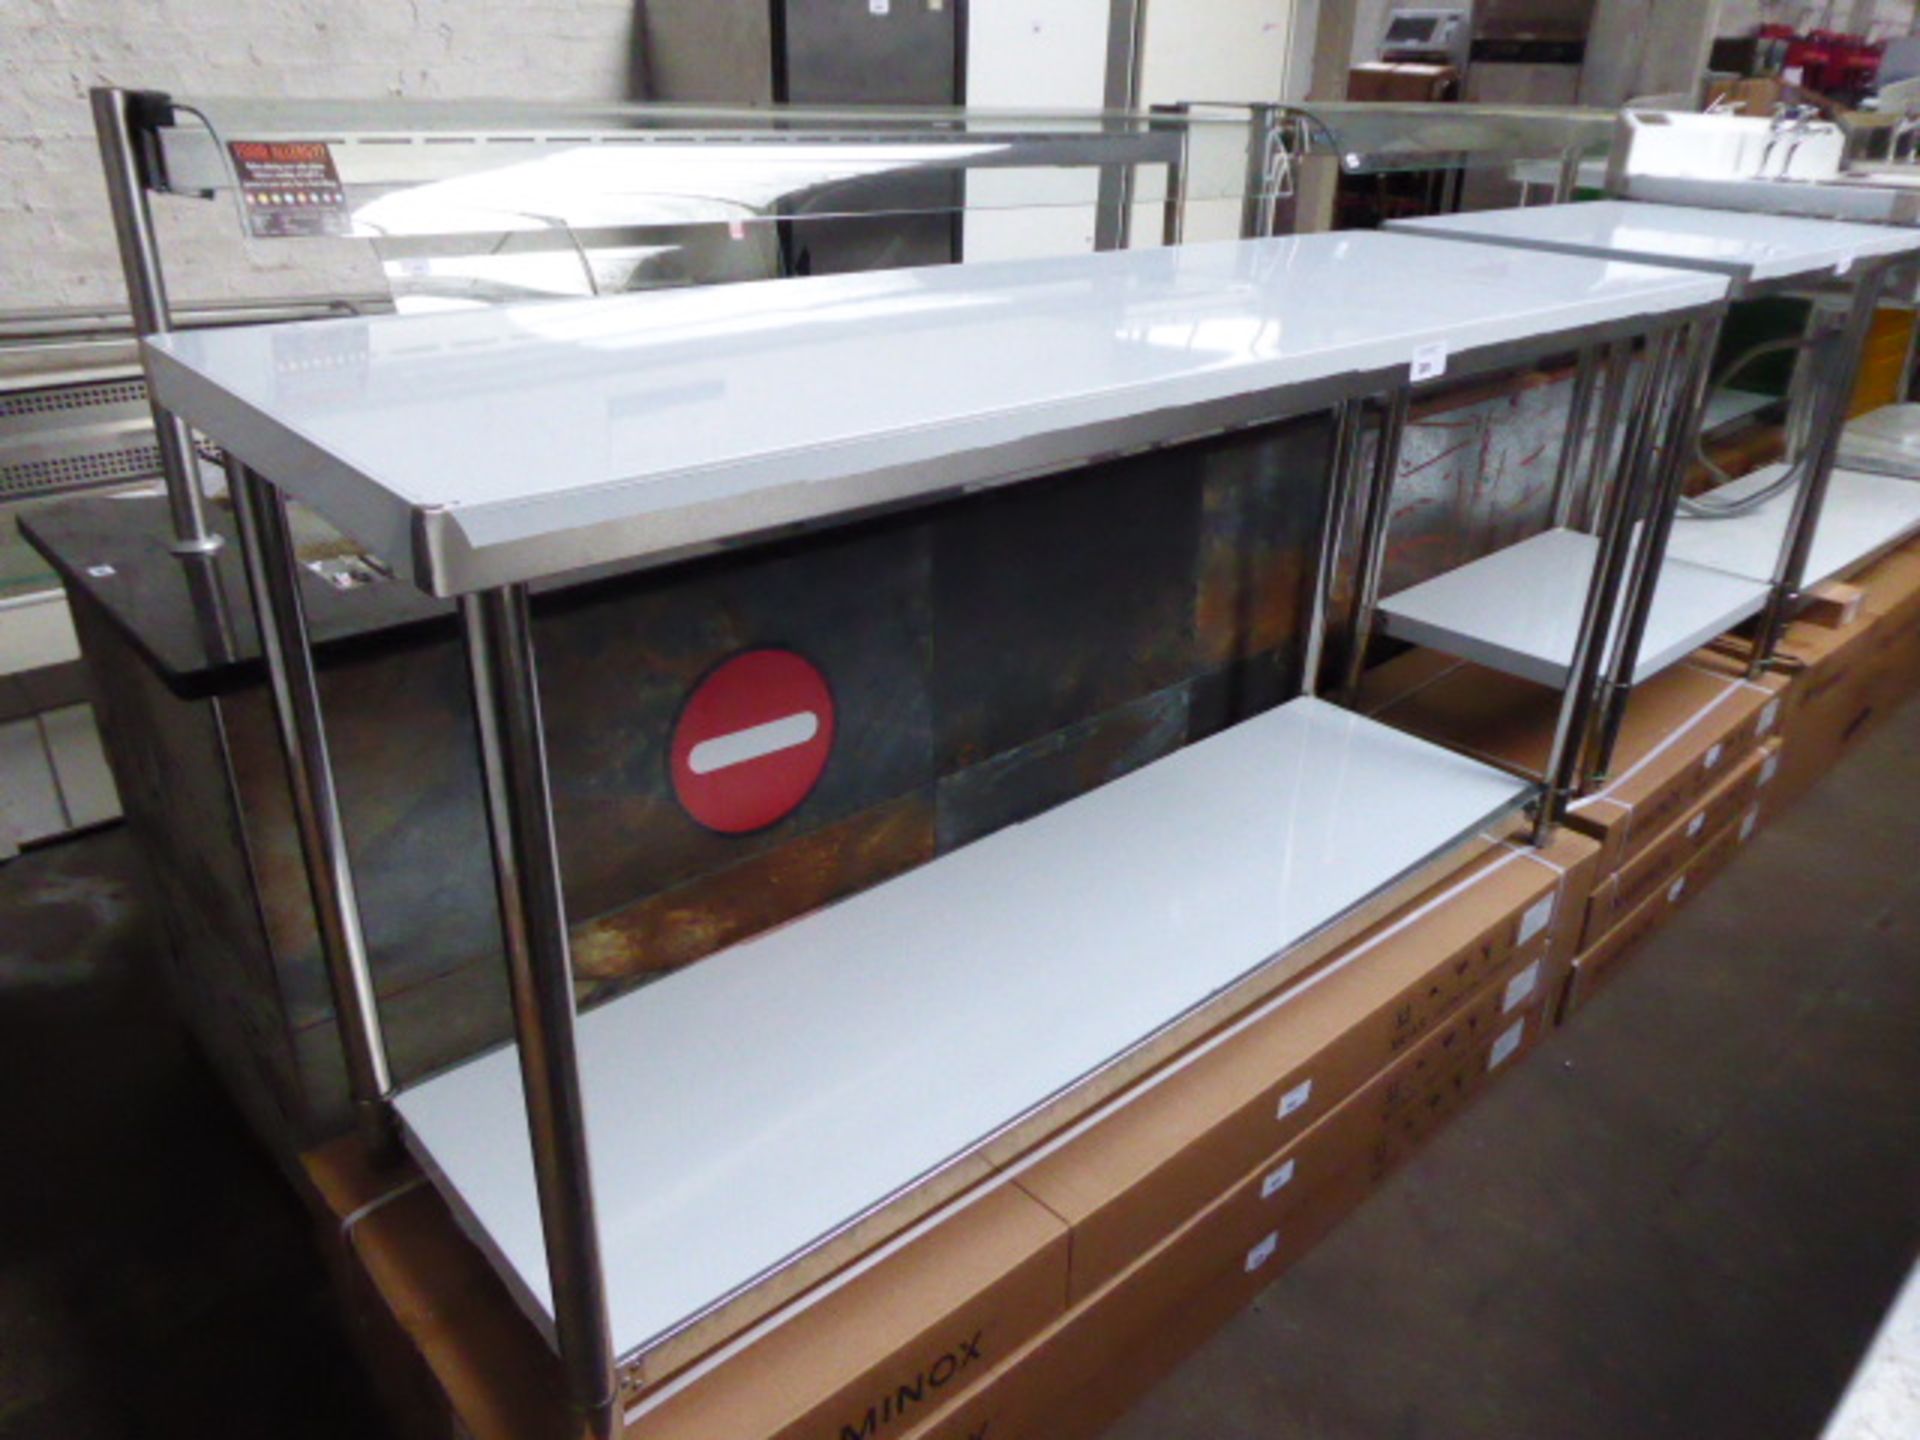 182cm Diaminox stainless steel preparation table with a shelf under - boxed